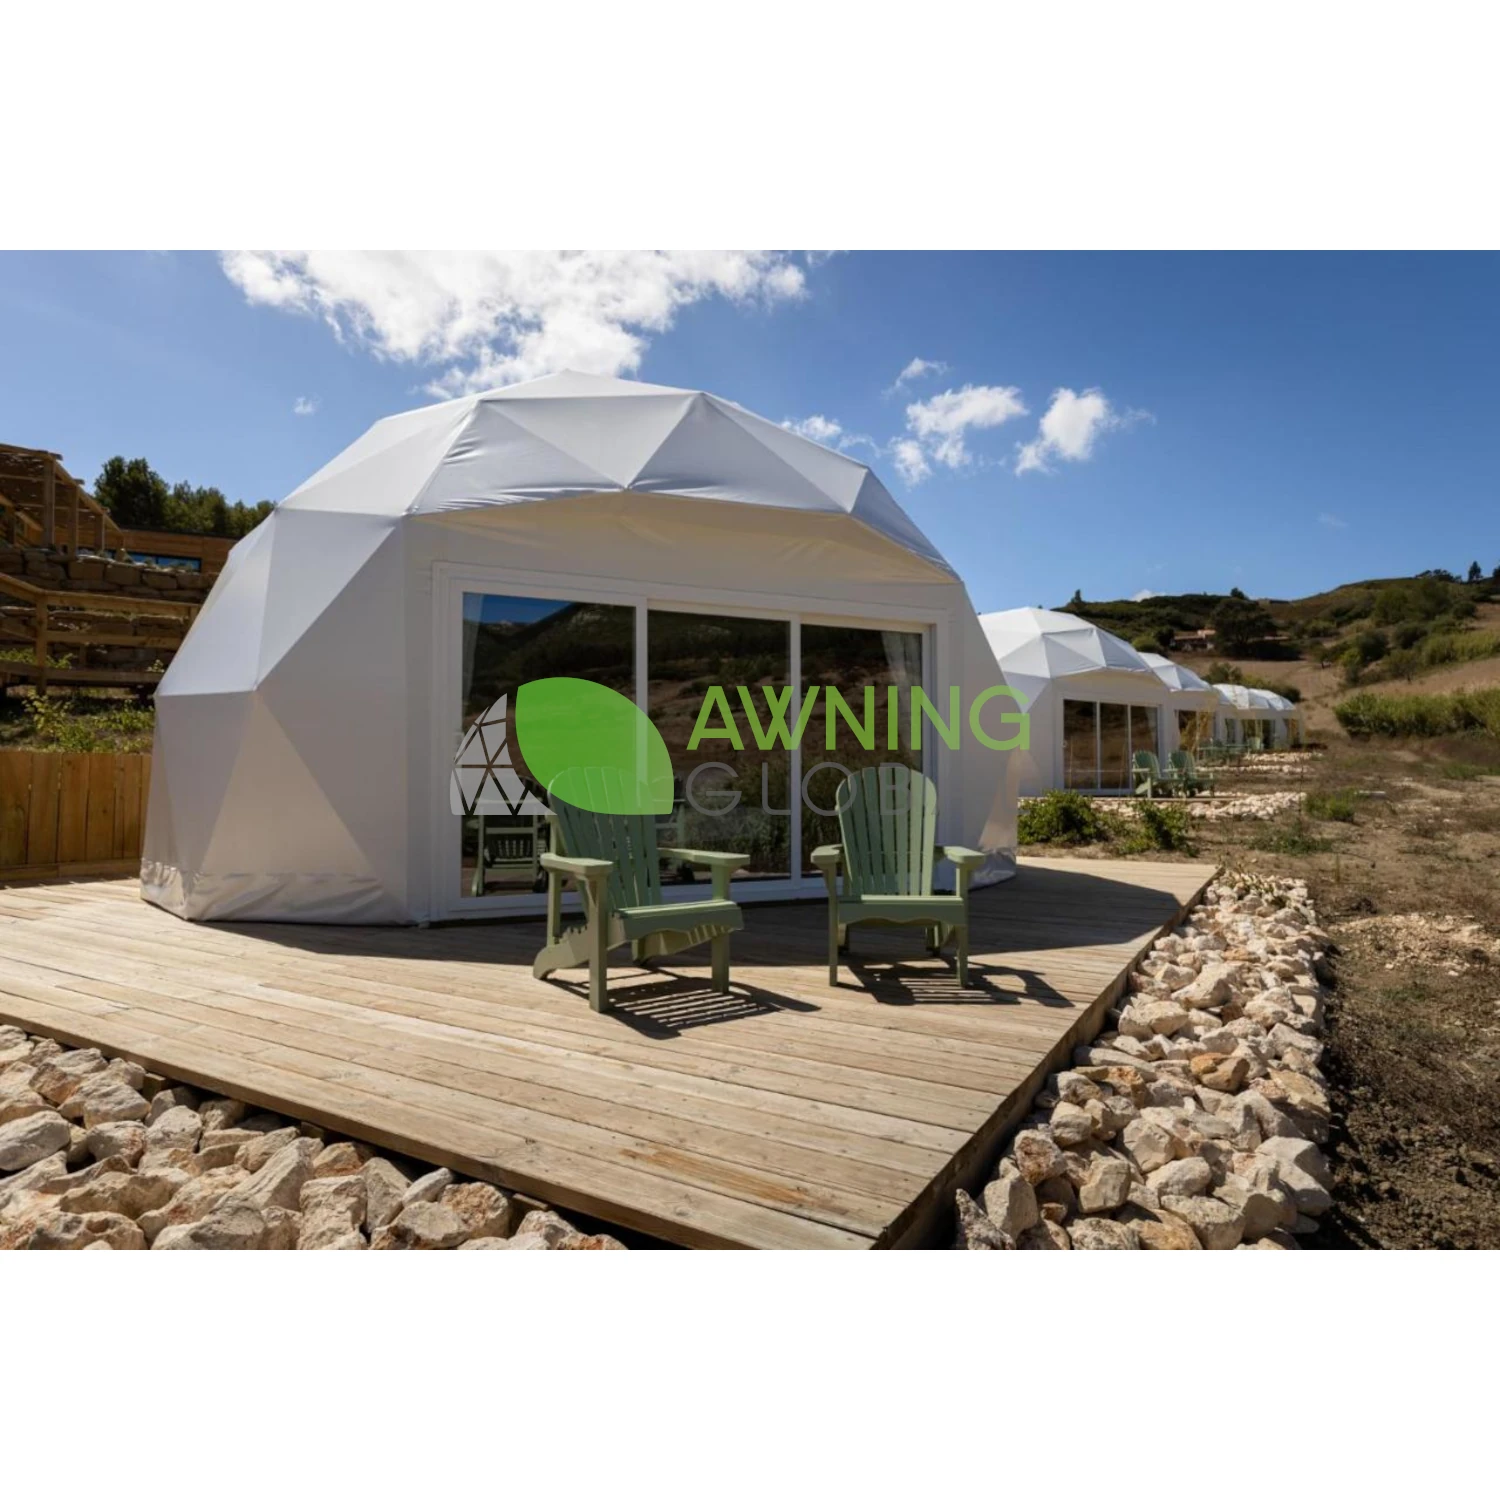 Geodesic dome latest design awning global (1)